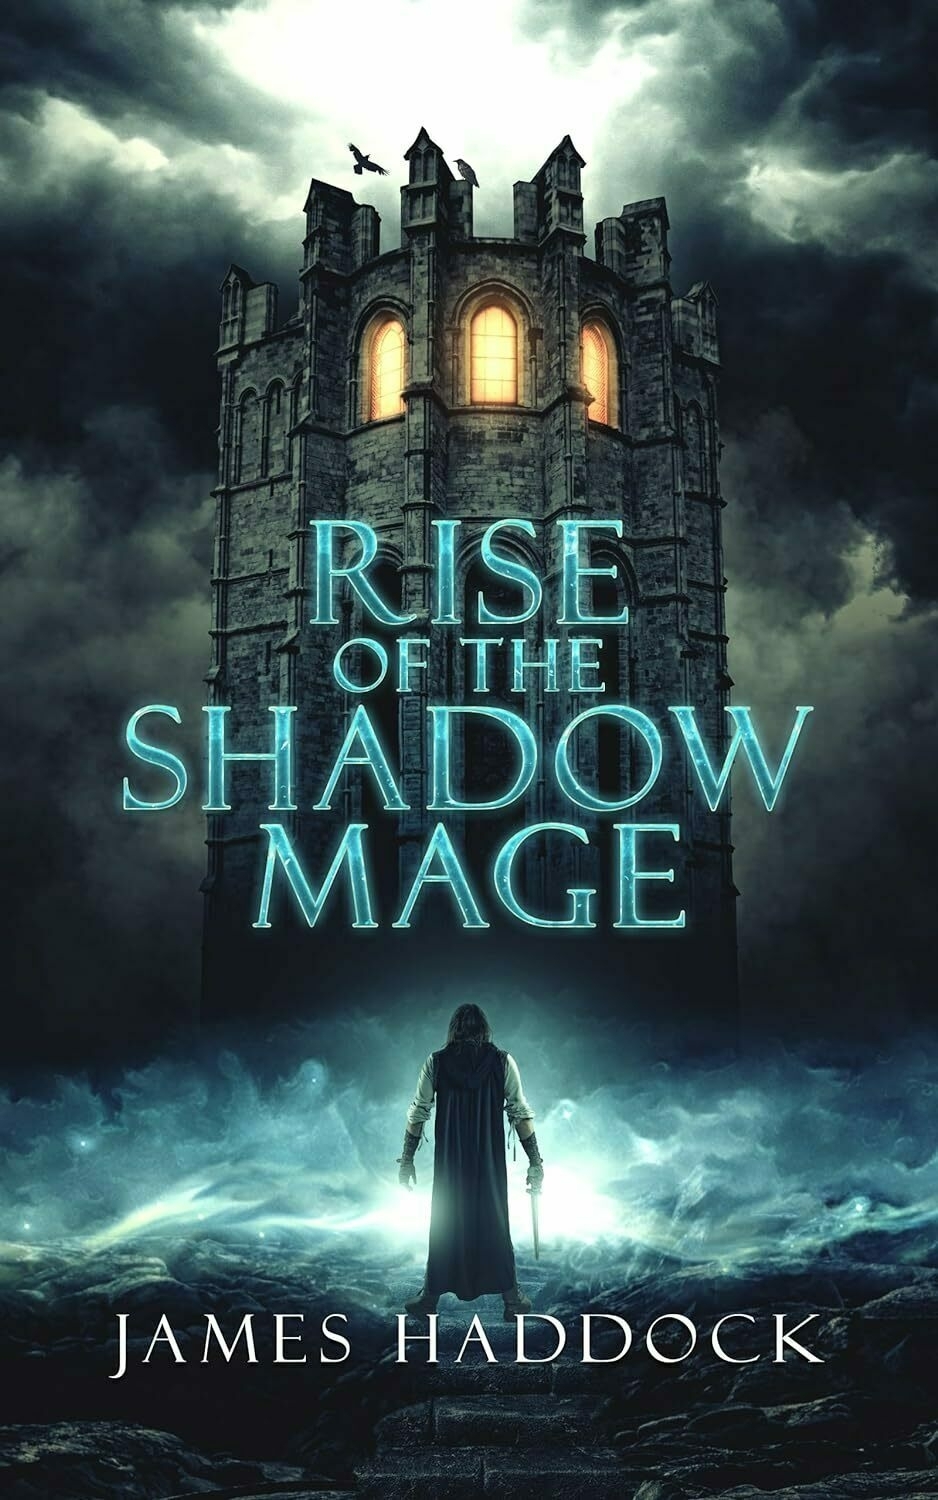 A cloaked figure stands before an imposing castle with glowing windows, under a dark, cloudy sky. Text reads: 'RISE OF THE SHADOW MAGE' by JAMES HADDOCK.